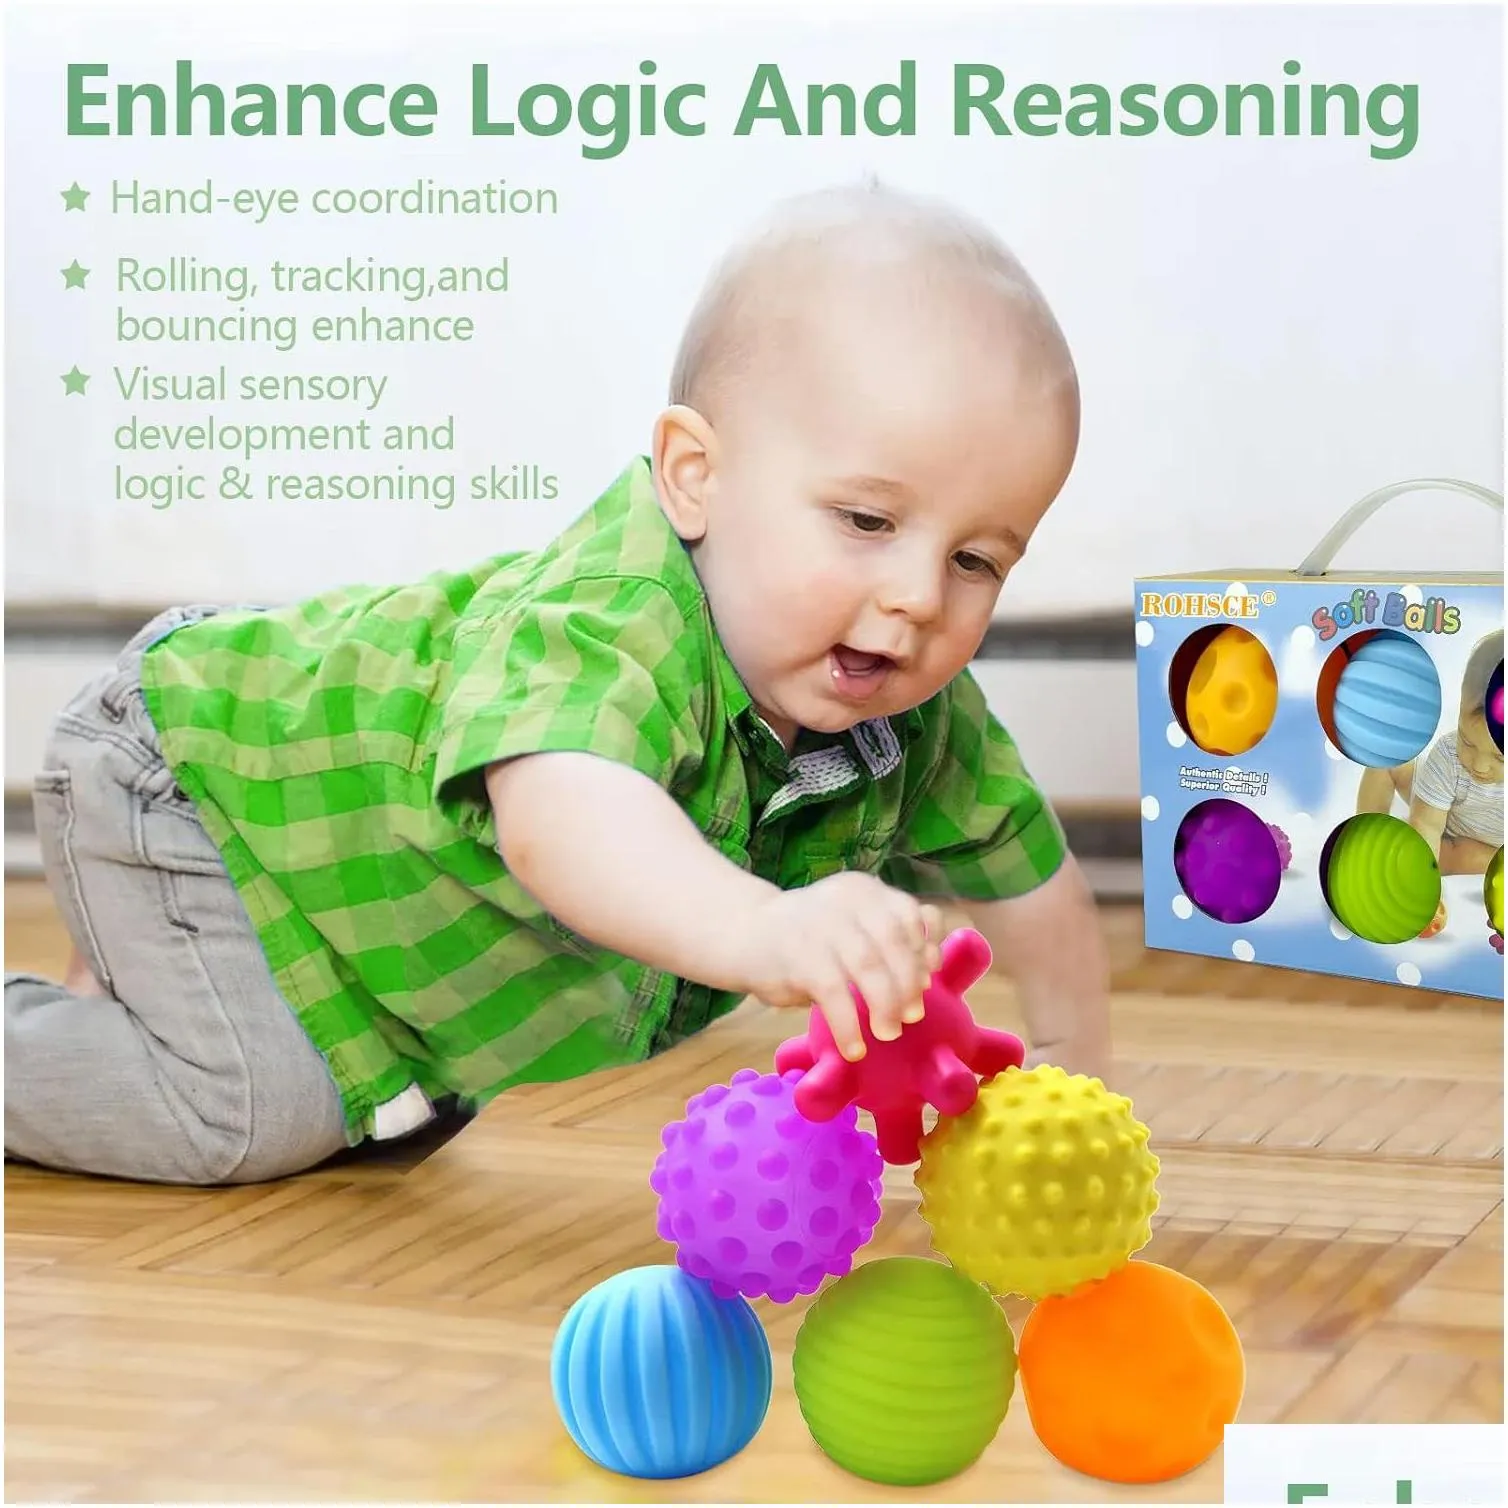 Other Toys Sensory Balls For Baby 6 To 12 Months Toddlers 1-3 Bright Color Textured Mti Soft Ball Gift Sets Montessori Babies 6-12 Inf Ot0Ro